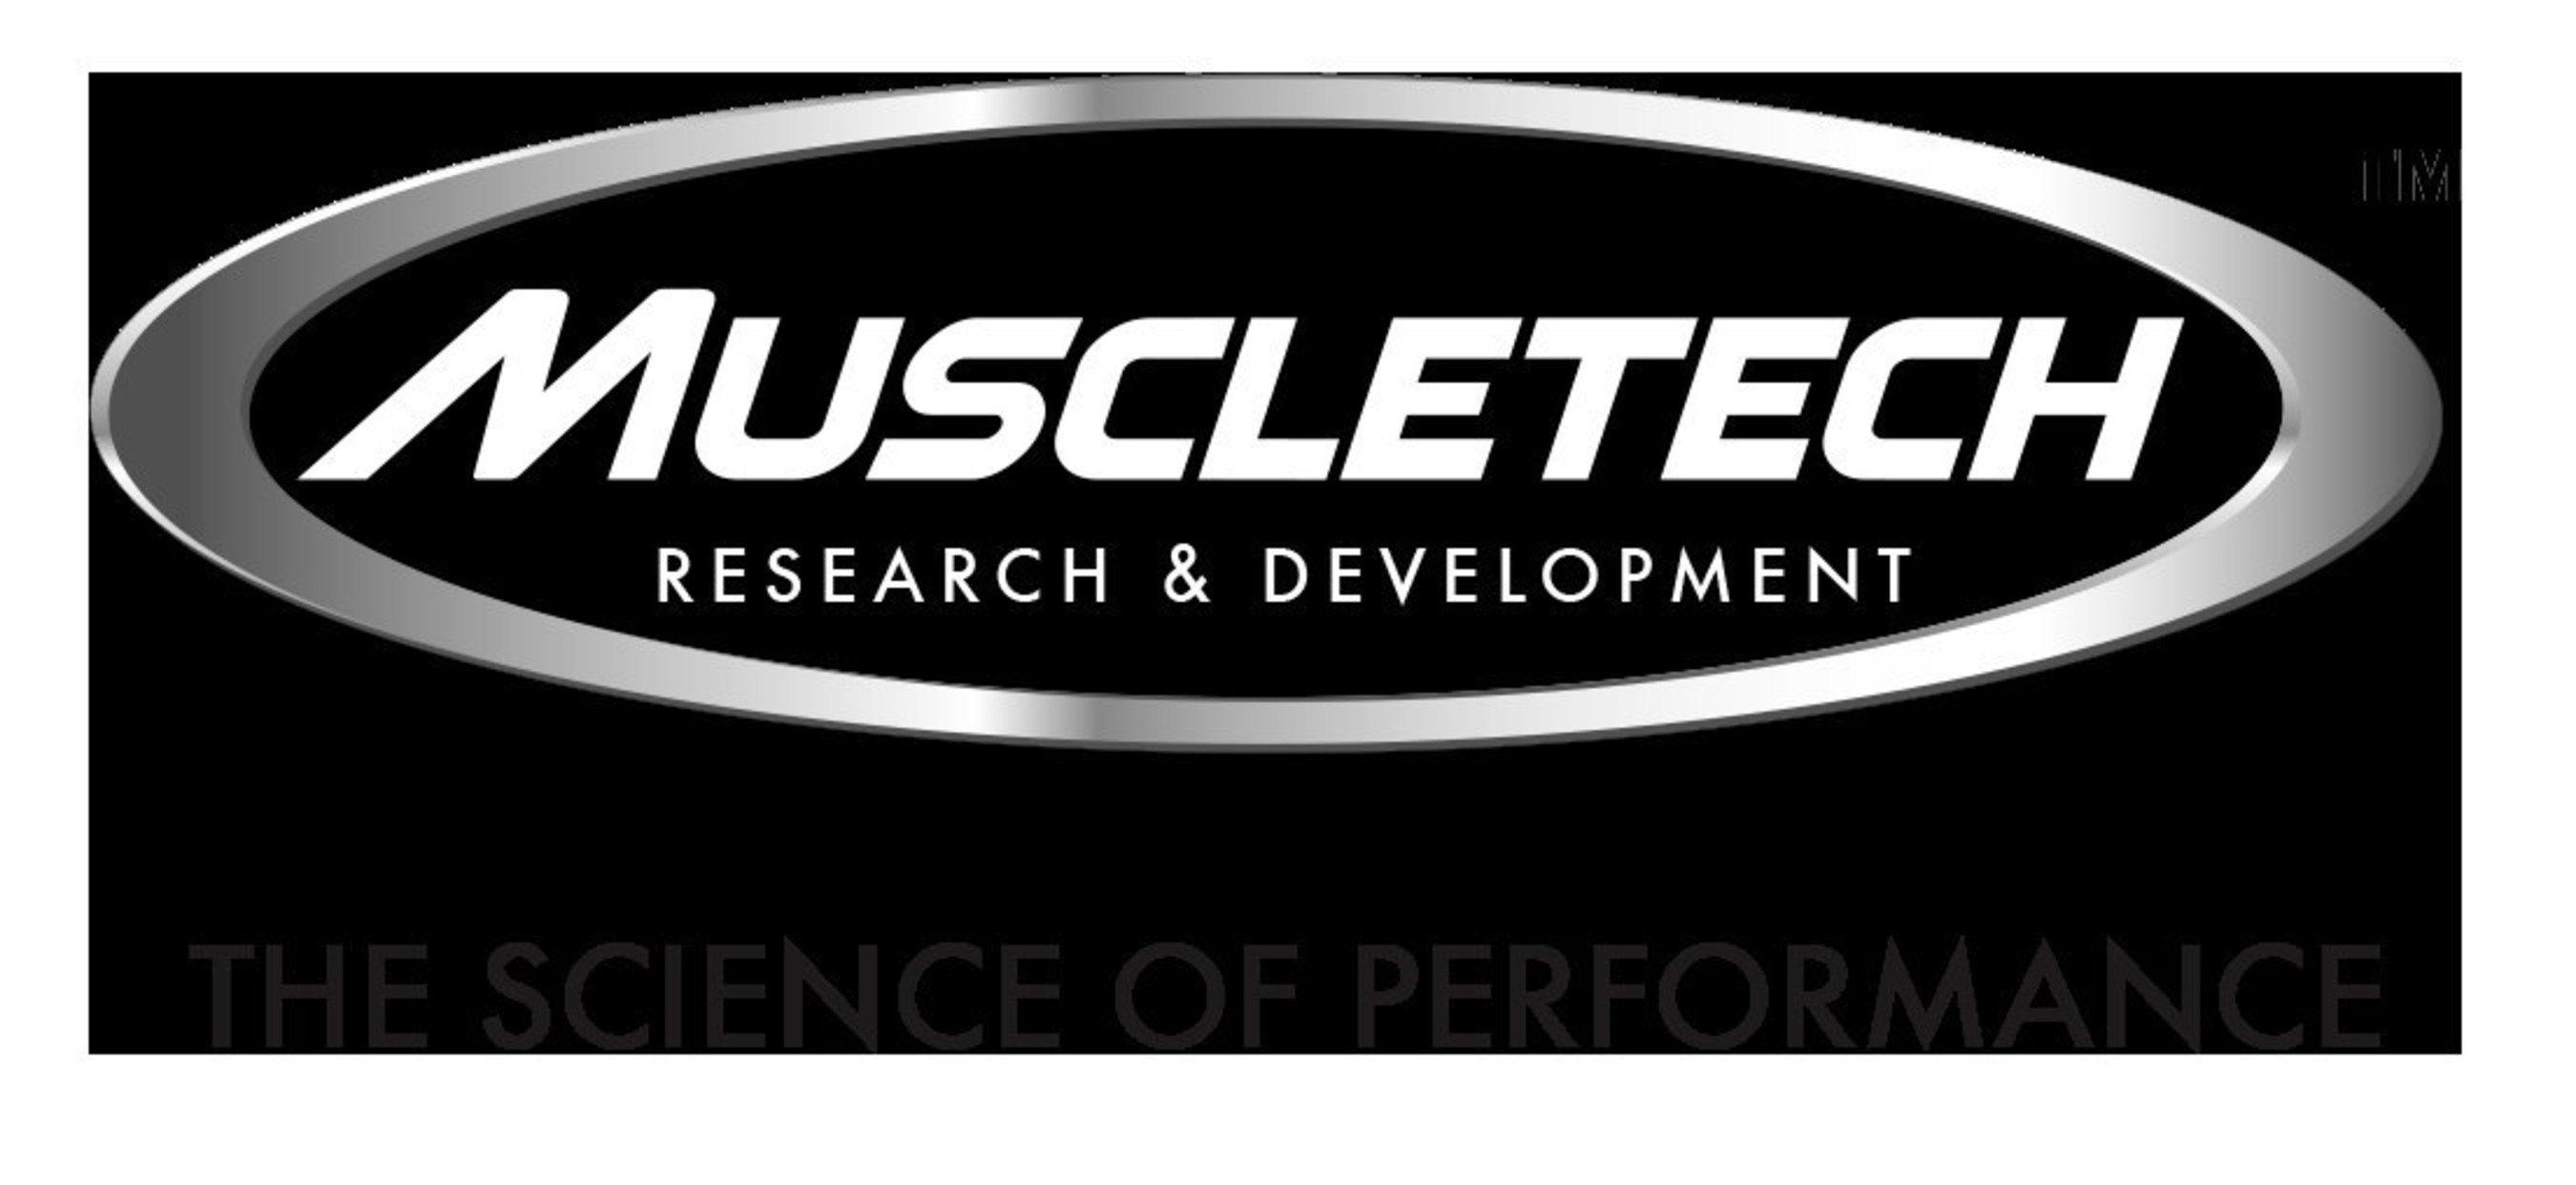 MuscleTech Logo - What's the Secret to Keeping Up with the Joneses?